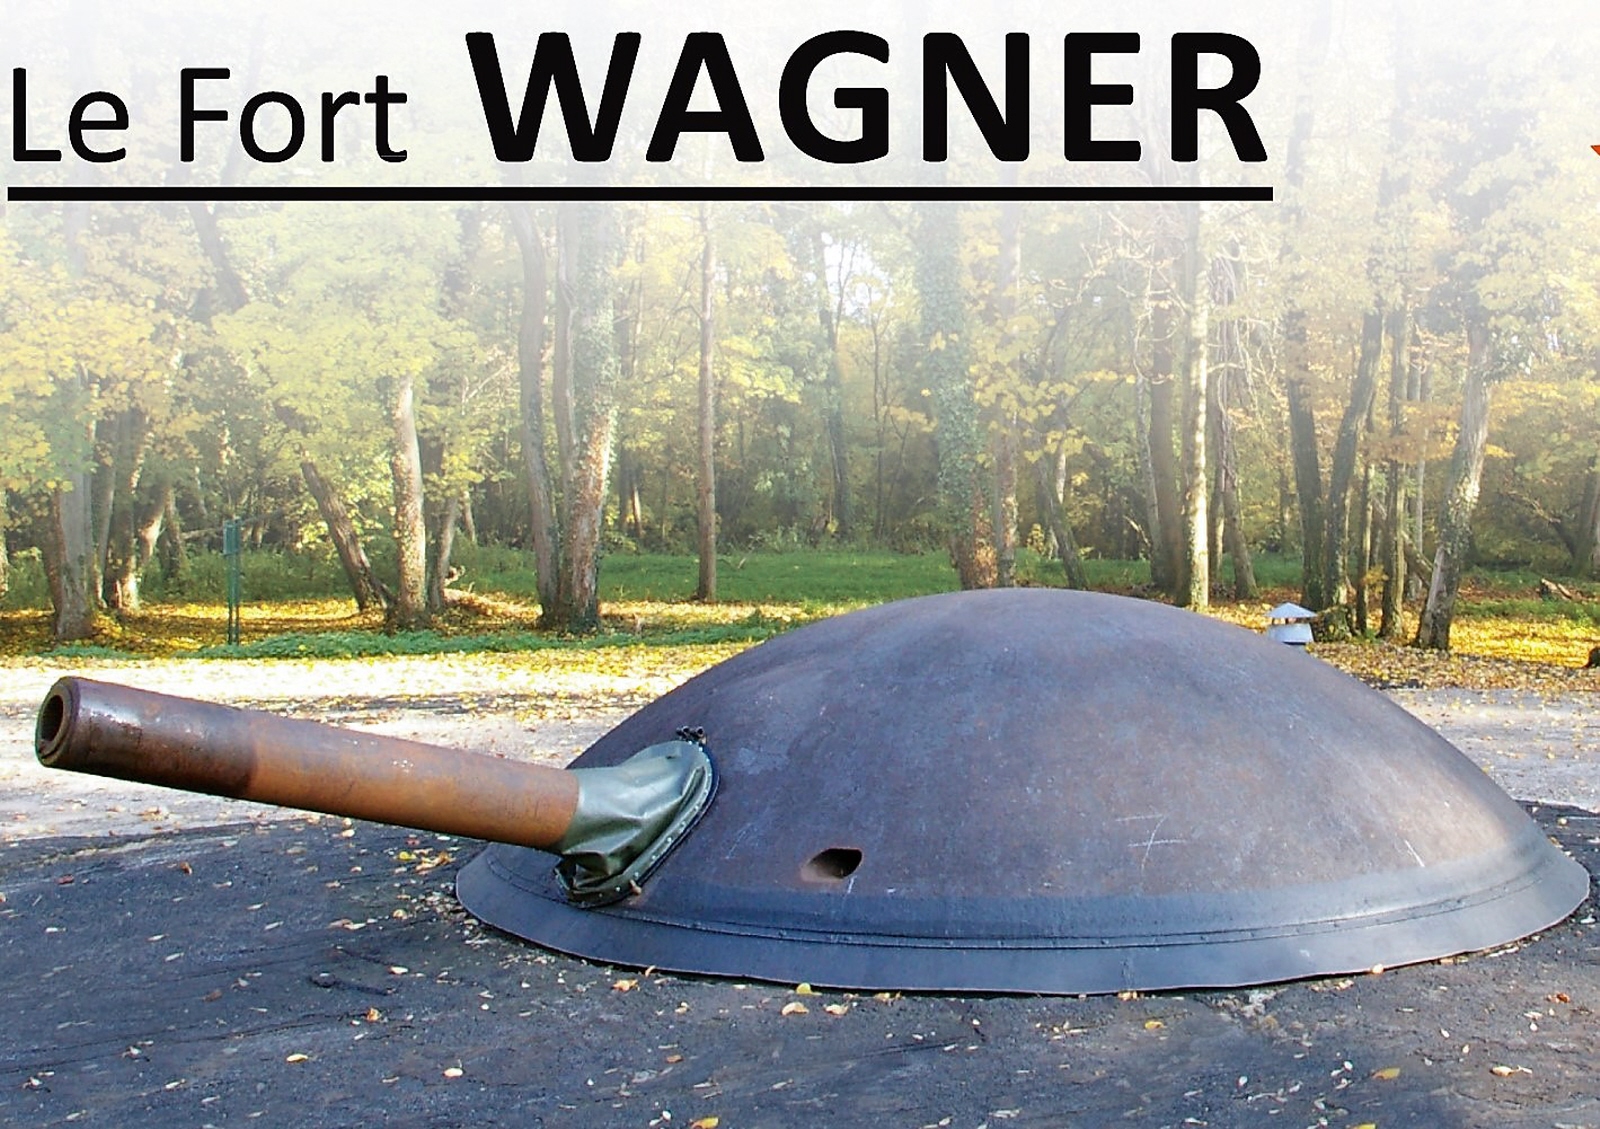 Le Fort WAGNER (Verny)